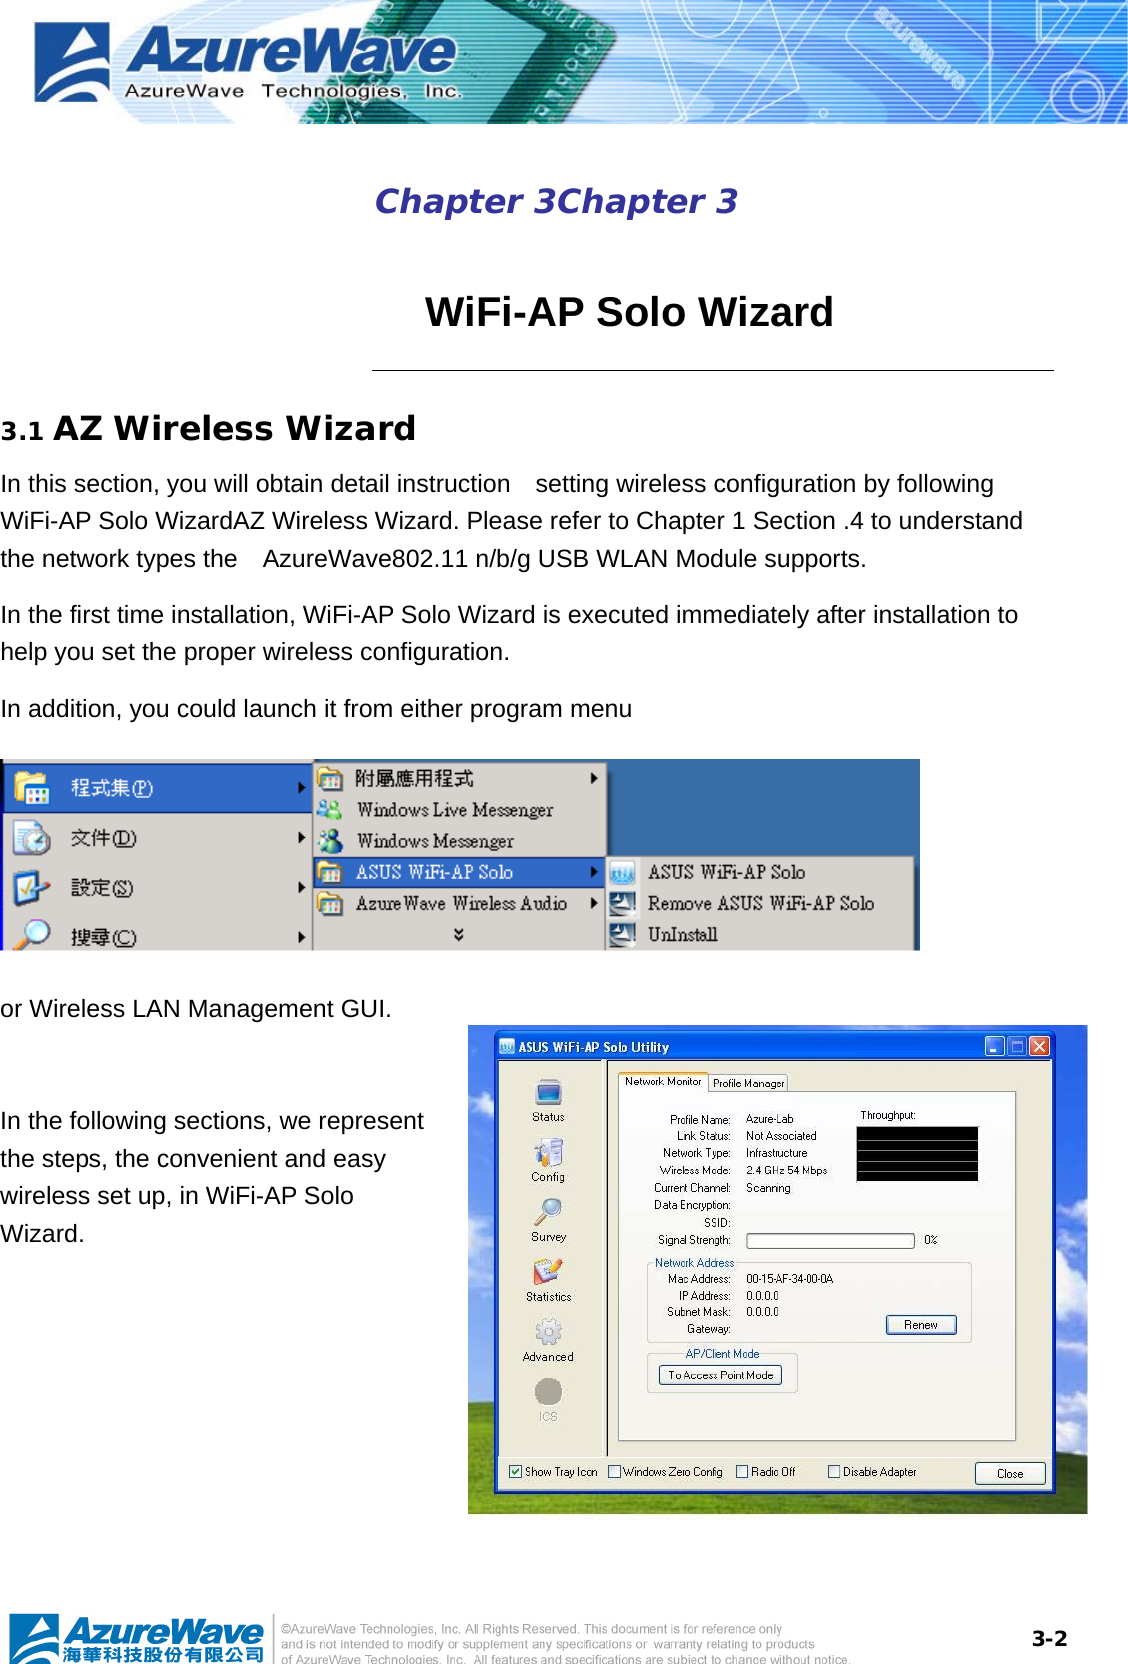  3-2Chapter 3Chapter 3    WiFi-AP Solo Wizard 3.1 AZ Wireless Wizard In this section, you will obtain detail instruction    setting wireless configuration by following WiFi-AP Solo WizardAZ Wireless Wizard. Please refer to Chapter 1 Section .4 to understand the network types the    AzureWave802.11 n/b/g USB WLAN Module supports. In the first time installation, WiFi-AP Solo Wizard is executed immediately after installation to help you set the proper wireless configuration.   In addition, you could launch it from either program menu    or Wireless LAN Management GUI.  In the following sections, we represent the steps, the convenient and easy wireless set up, in WiFi-AP Solo Wizard. 